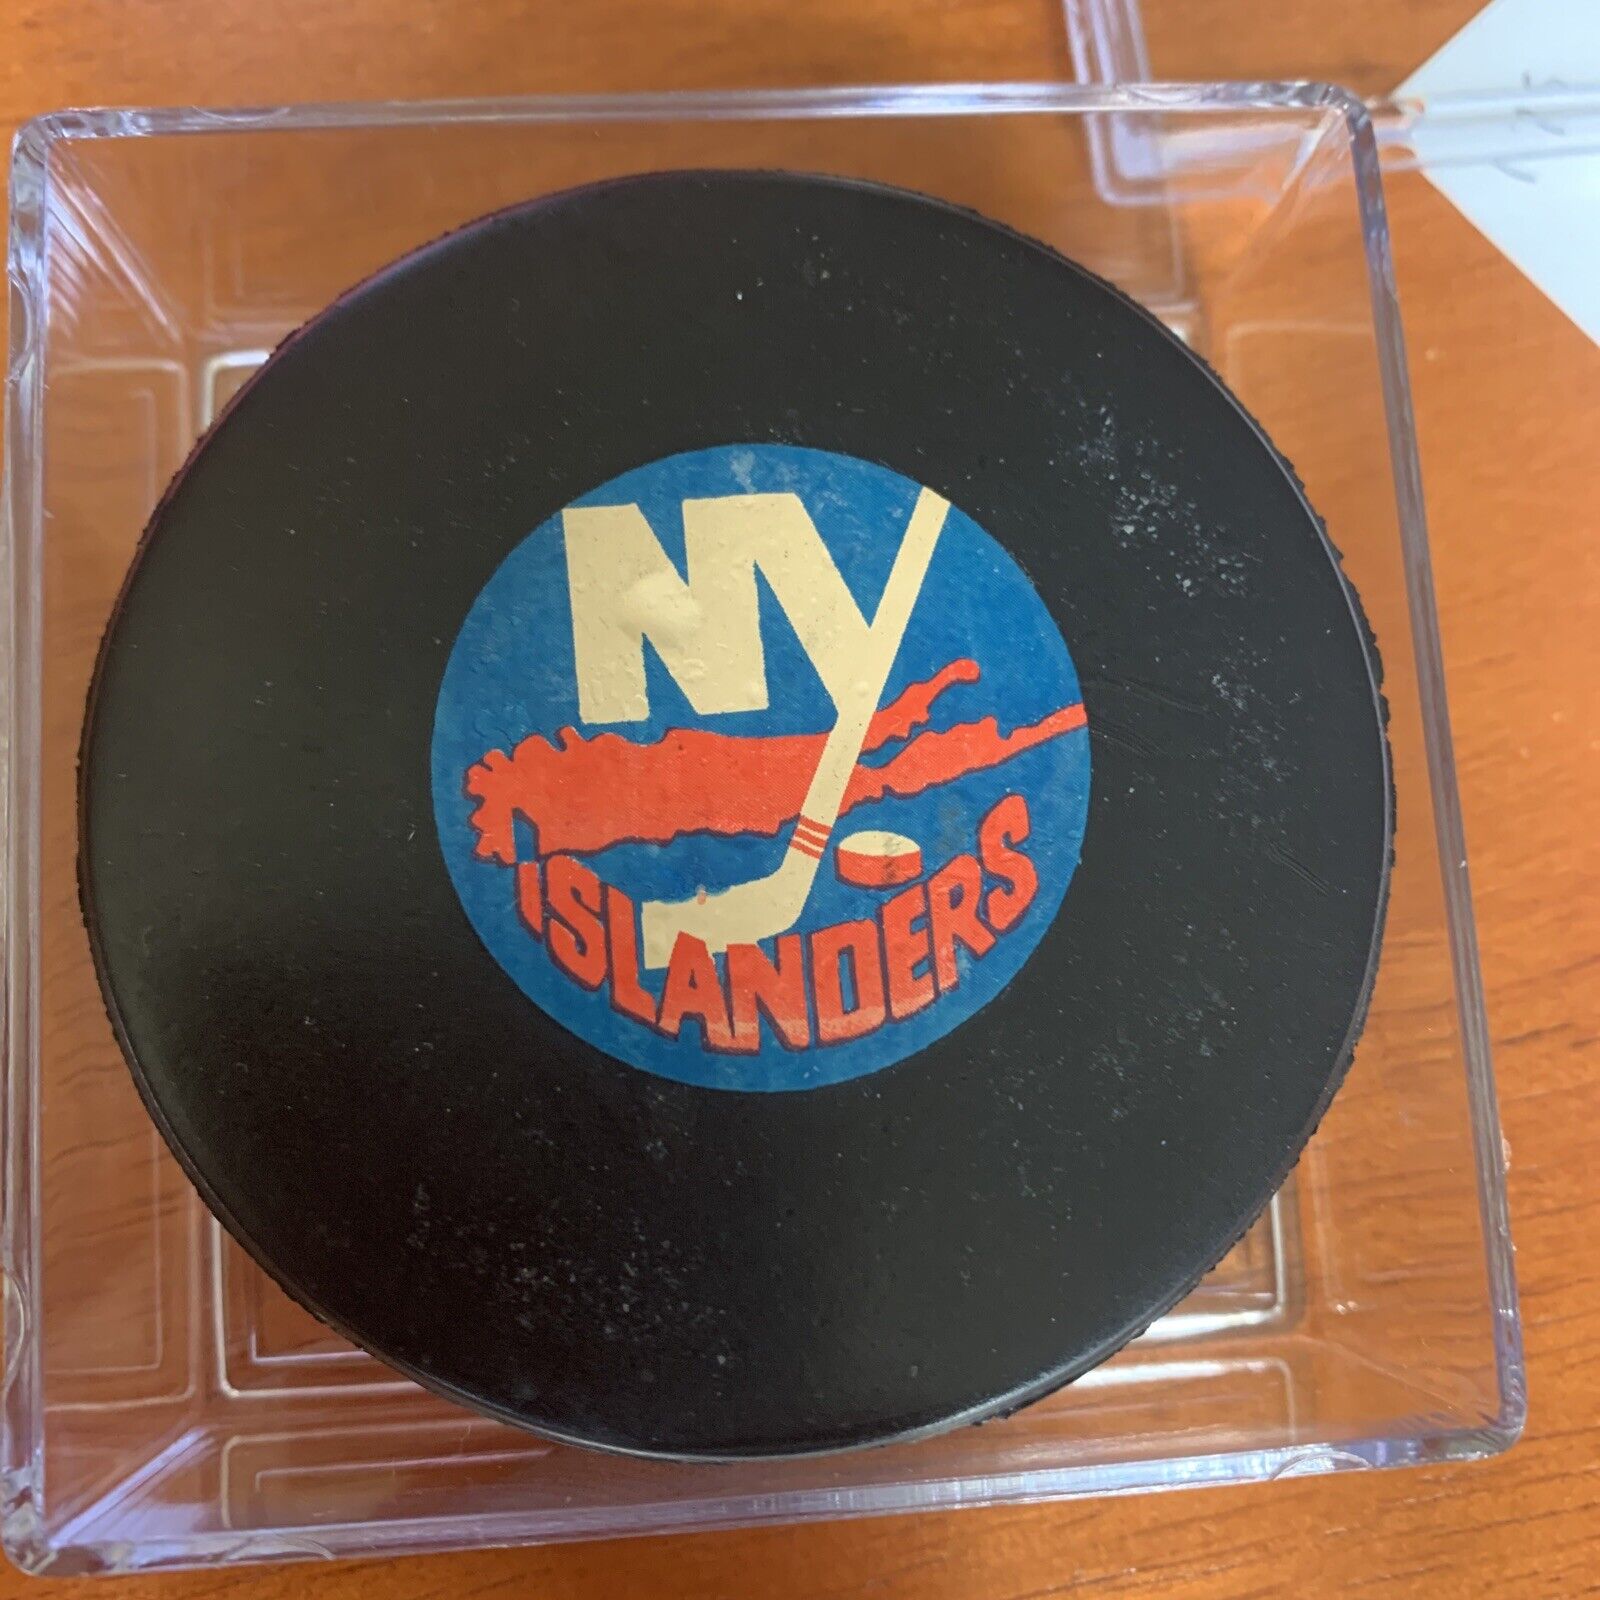 new york islanders viceroy rubbers and online shopping 1982-83 Branded goods plastic puck